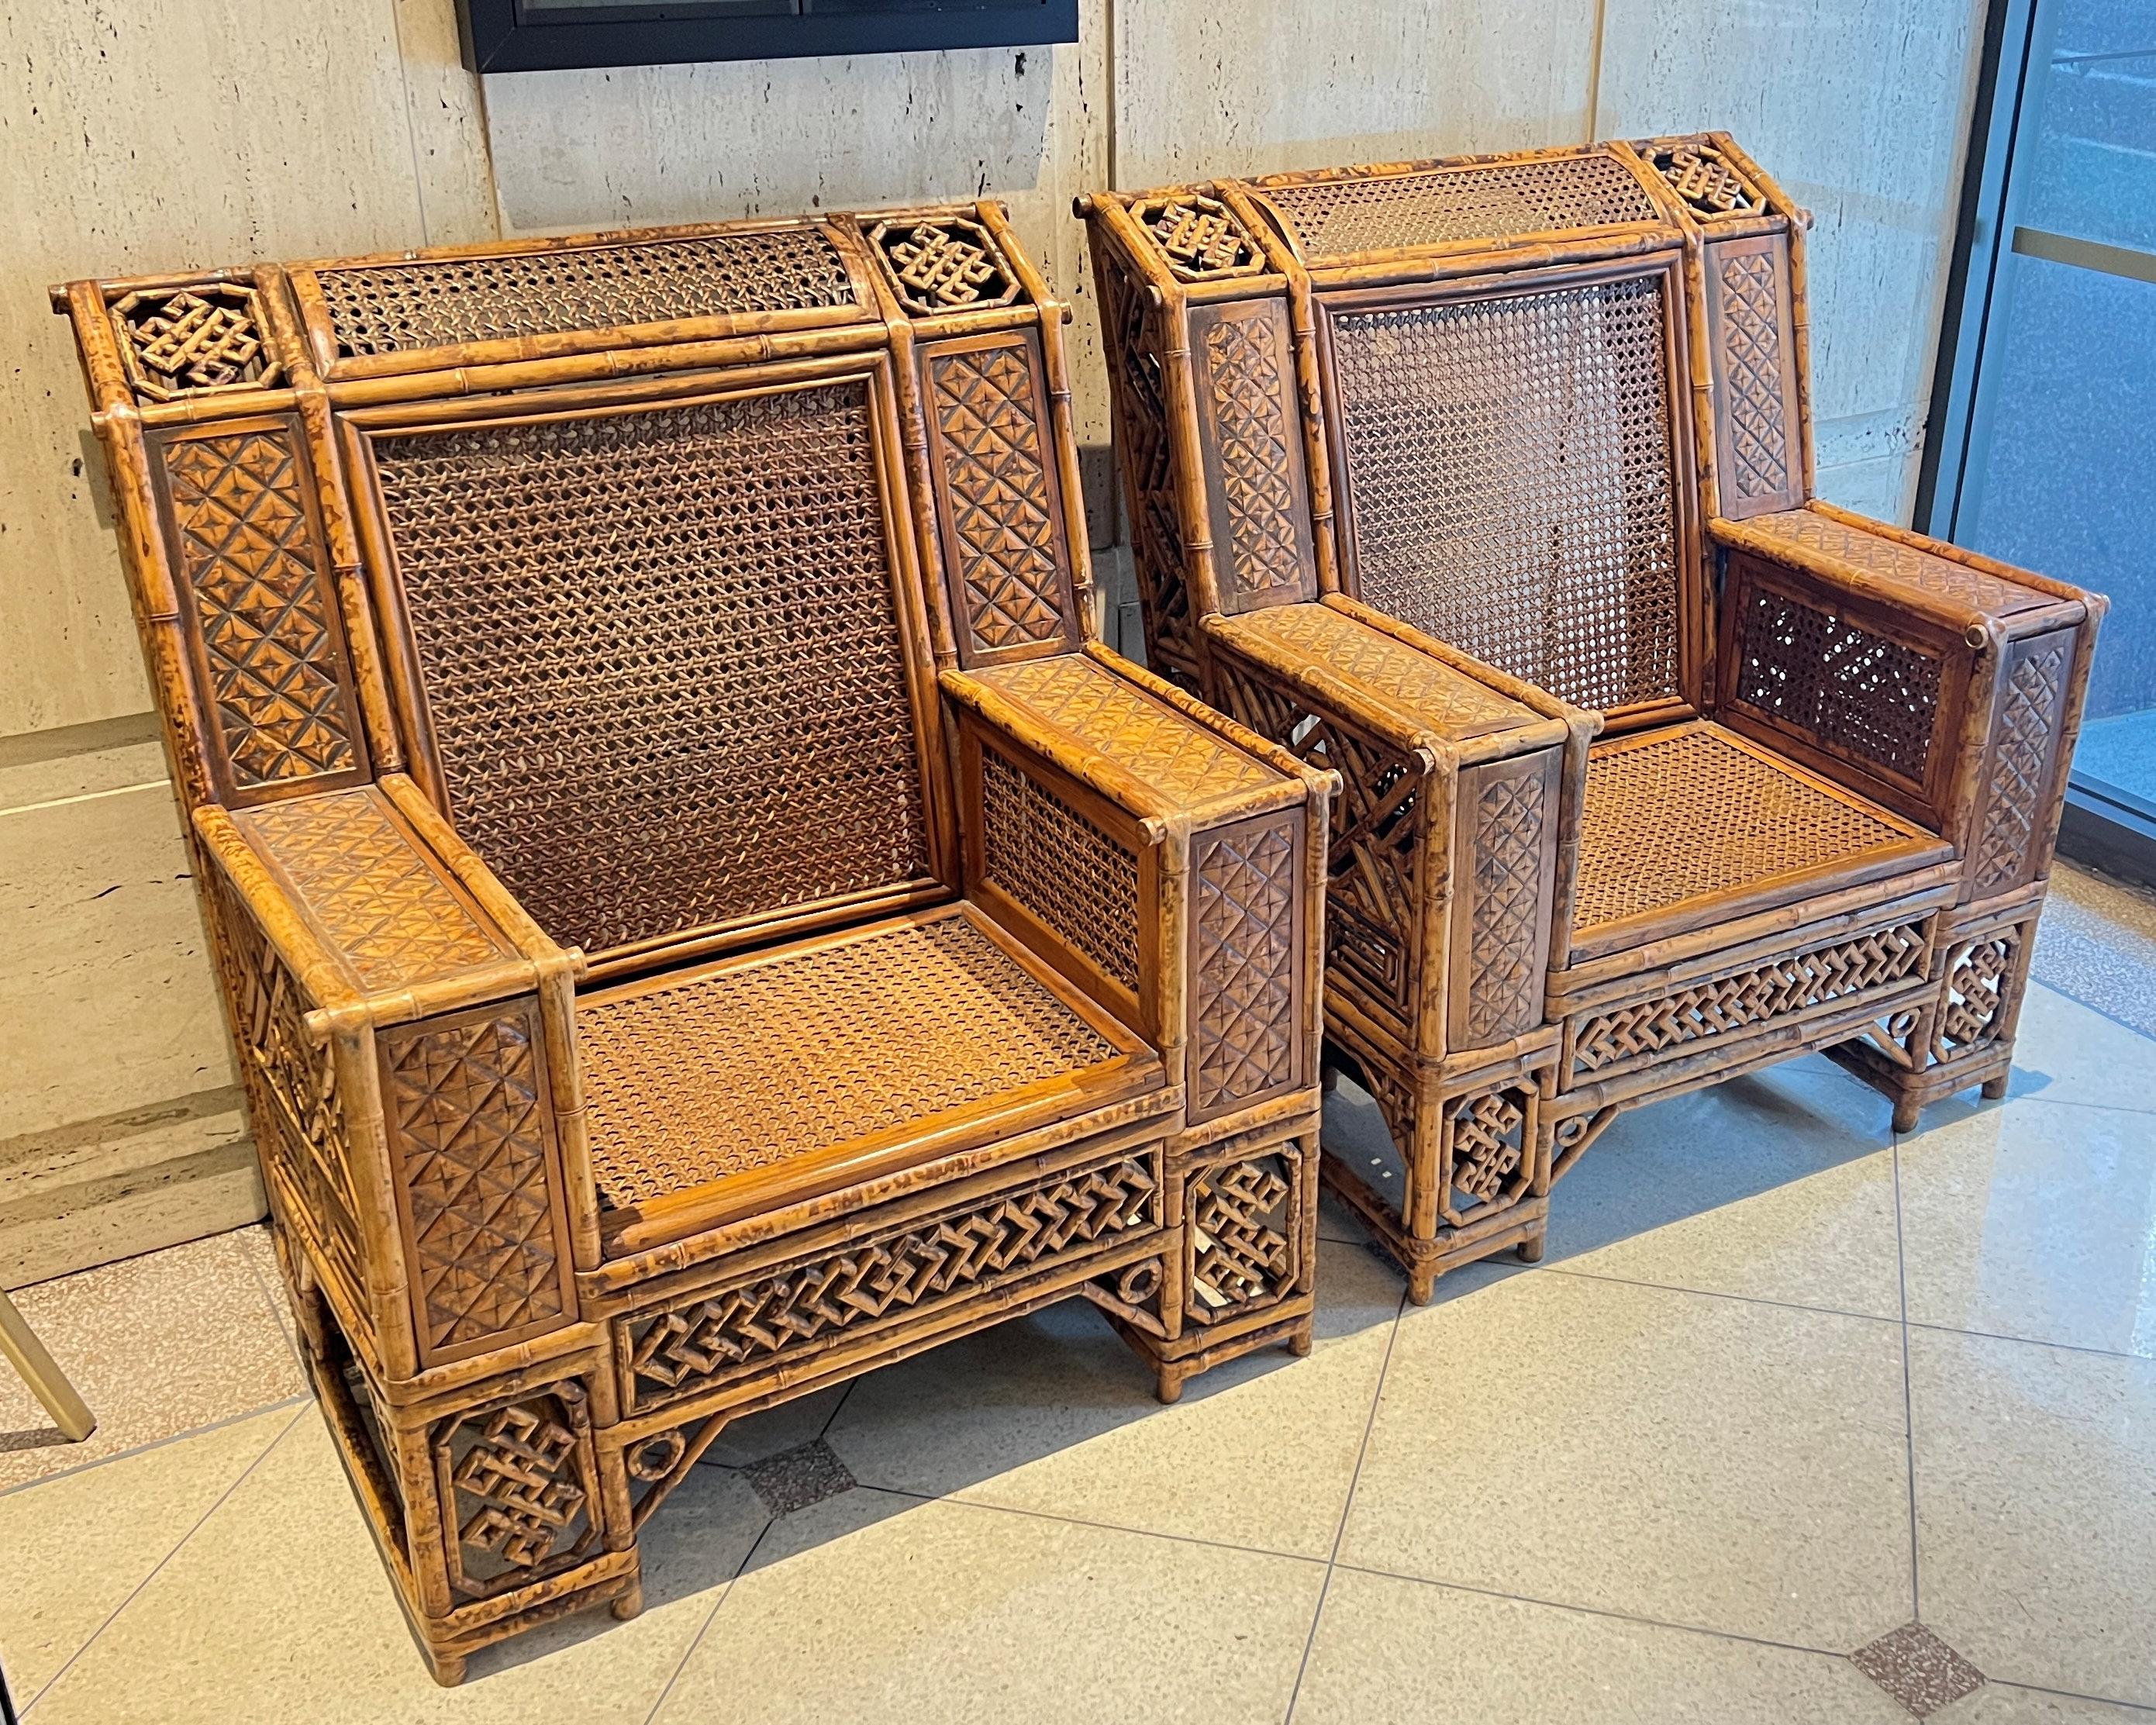 Our pair of armchairs, inspired by the Royal Pavilion style of the Georgian (George III reign) period, feature open fretwork panels and frames crafted from bamboo with rattan seats and seatbacks. Each in very good condition.